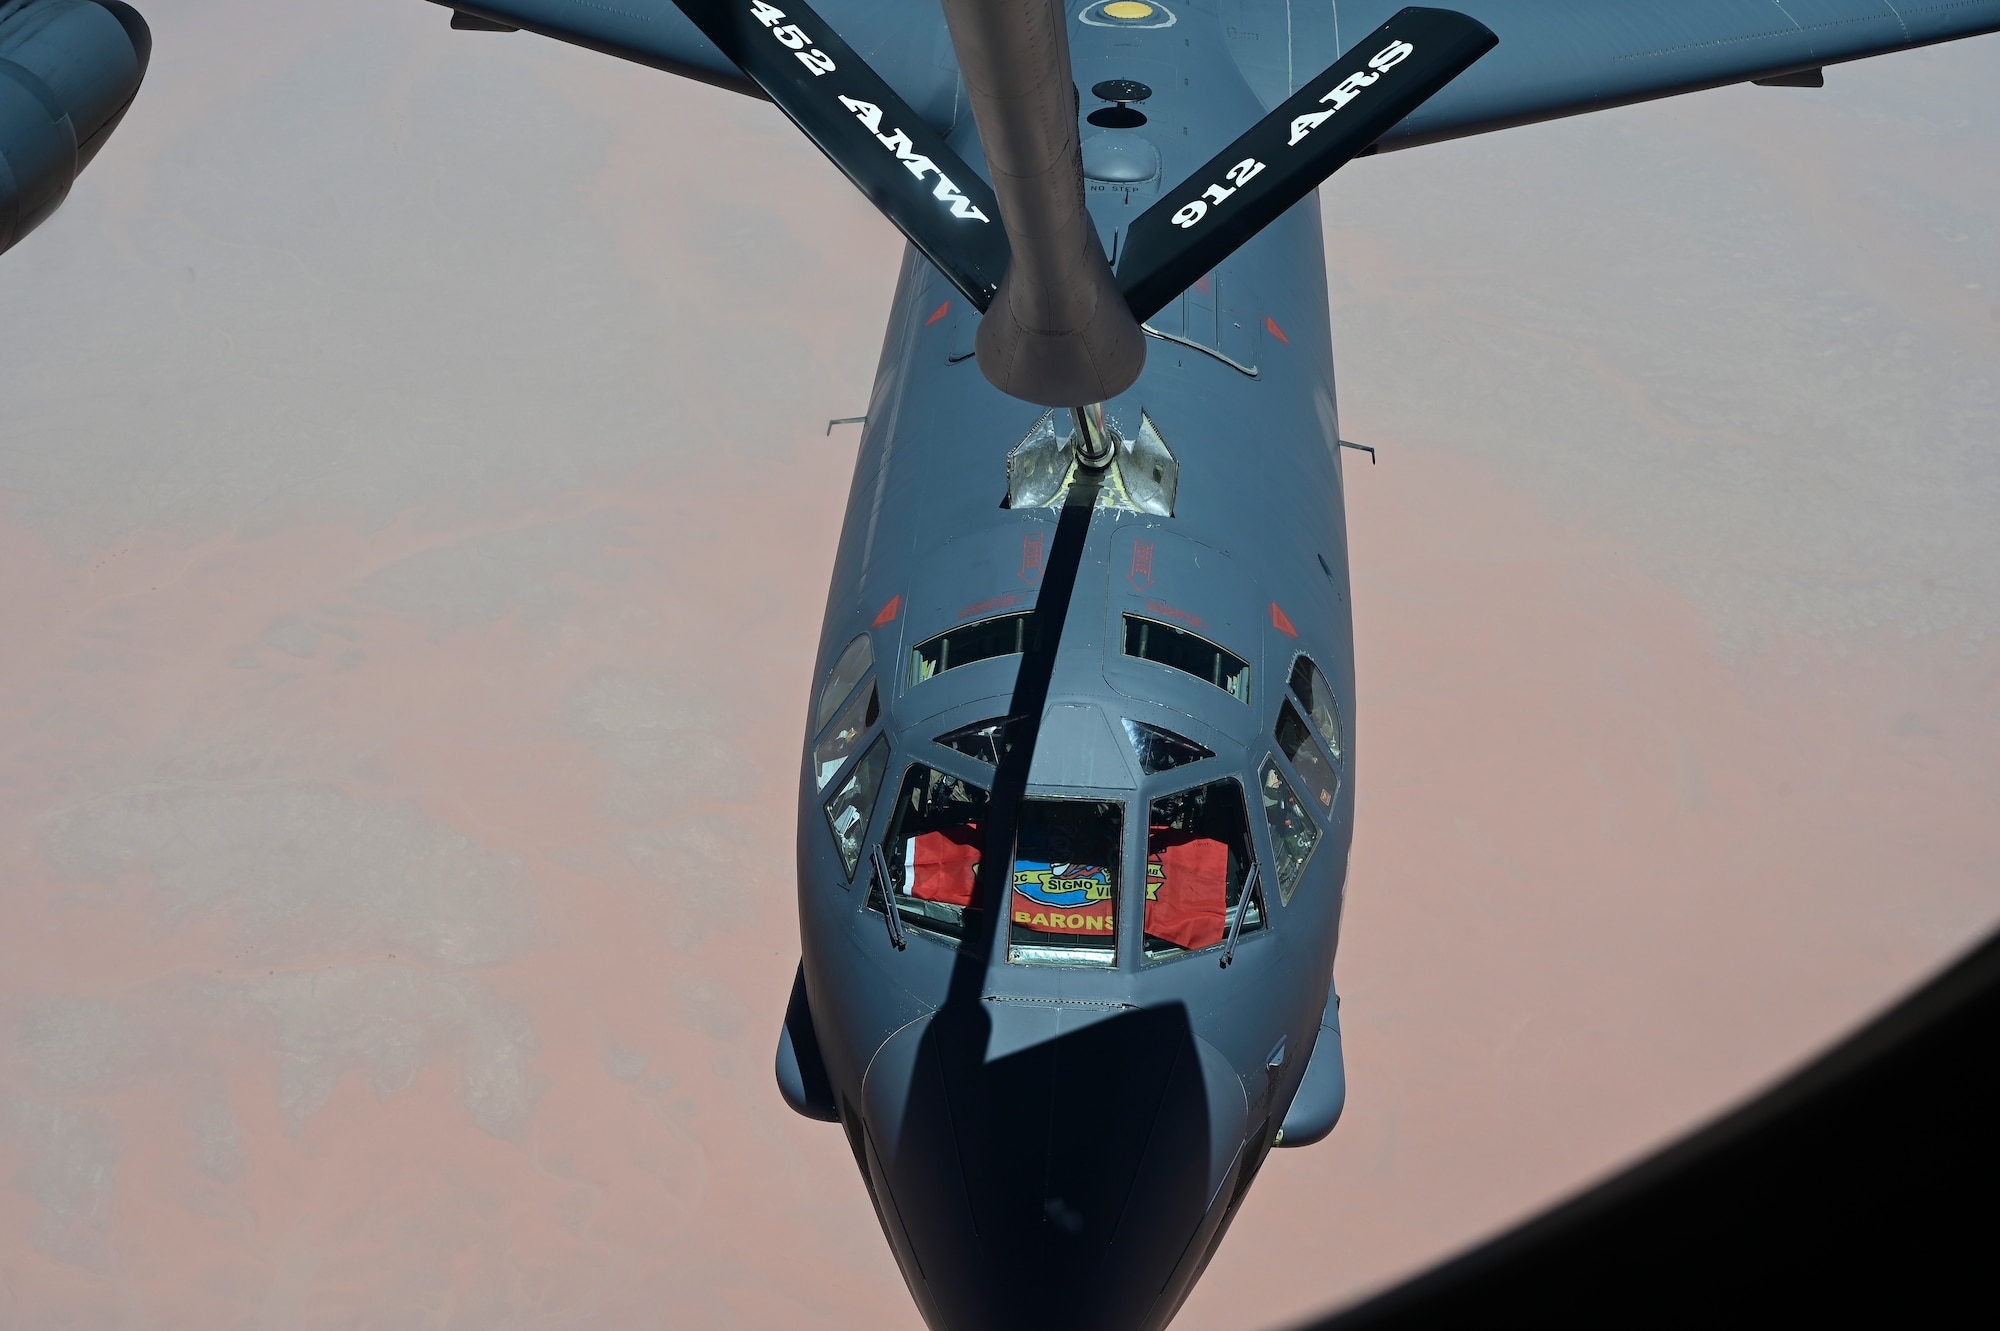 U.S. Air Force B-52 Stratofortress, assigned to the 5th Bomb Wing is refueled by a KC-135 Stratotanker assigned to the 350th Expeditionary Air Refueling Squadron over the U.S. Central Command area of responsibility June 8, 2022. The B-52 conducted a presence patrol mission to demonstrate the U.S.-led coalition commitment to promoting reginal stability. (U.S. Air Force photo by Staff Sgt. Ashley Sokolov)